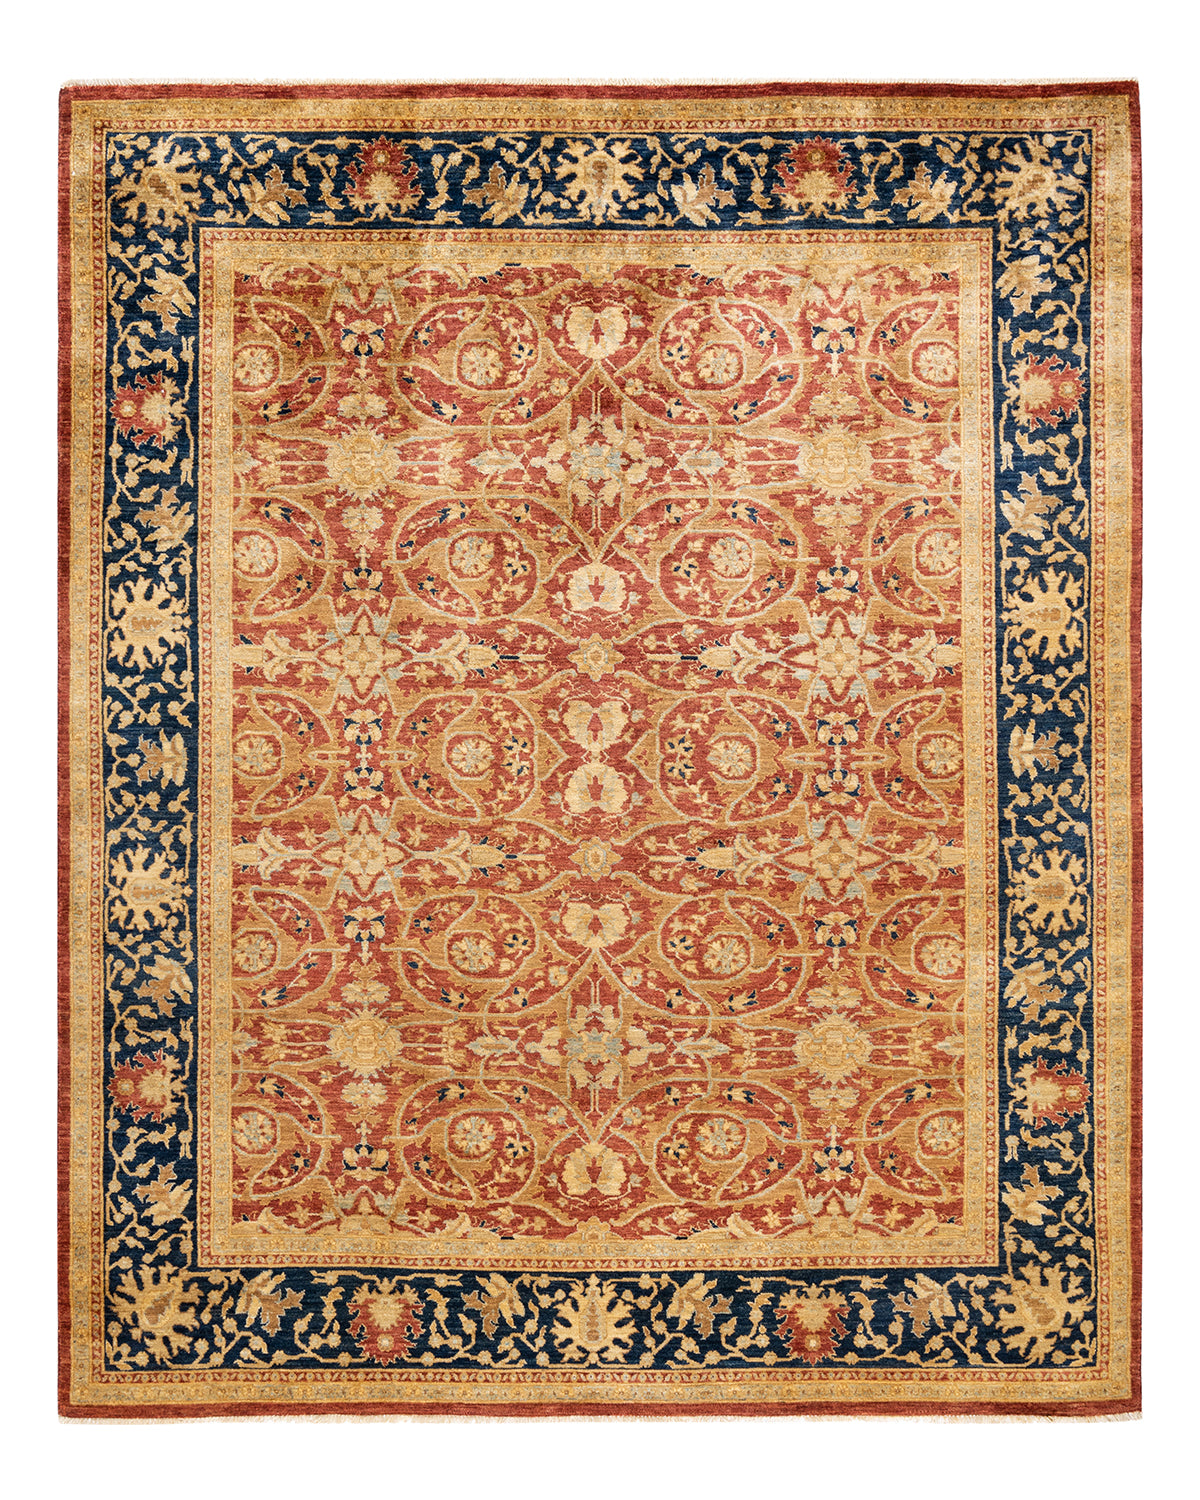 Eclectic, One-of-a-Kind Hand-Knotted Area Rug  - Orange,  7' 10" x 10' 0"